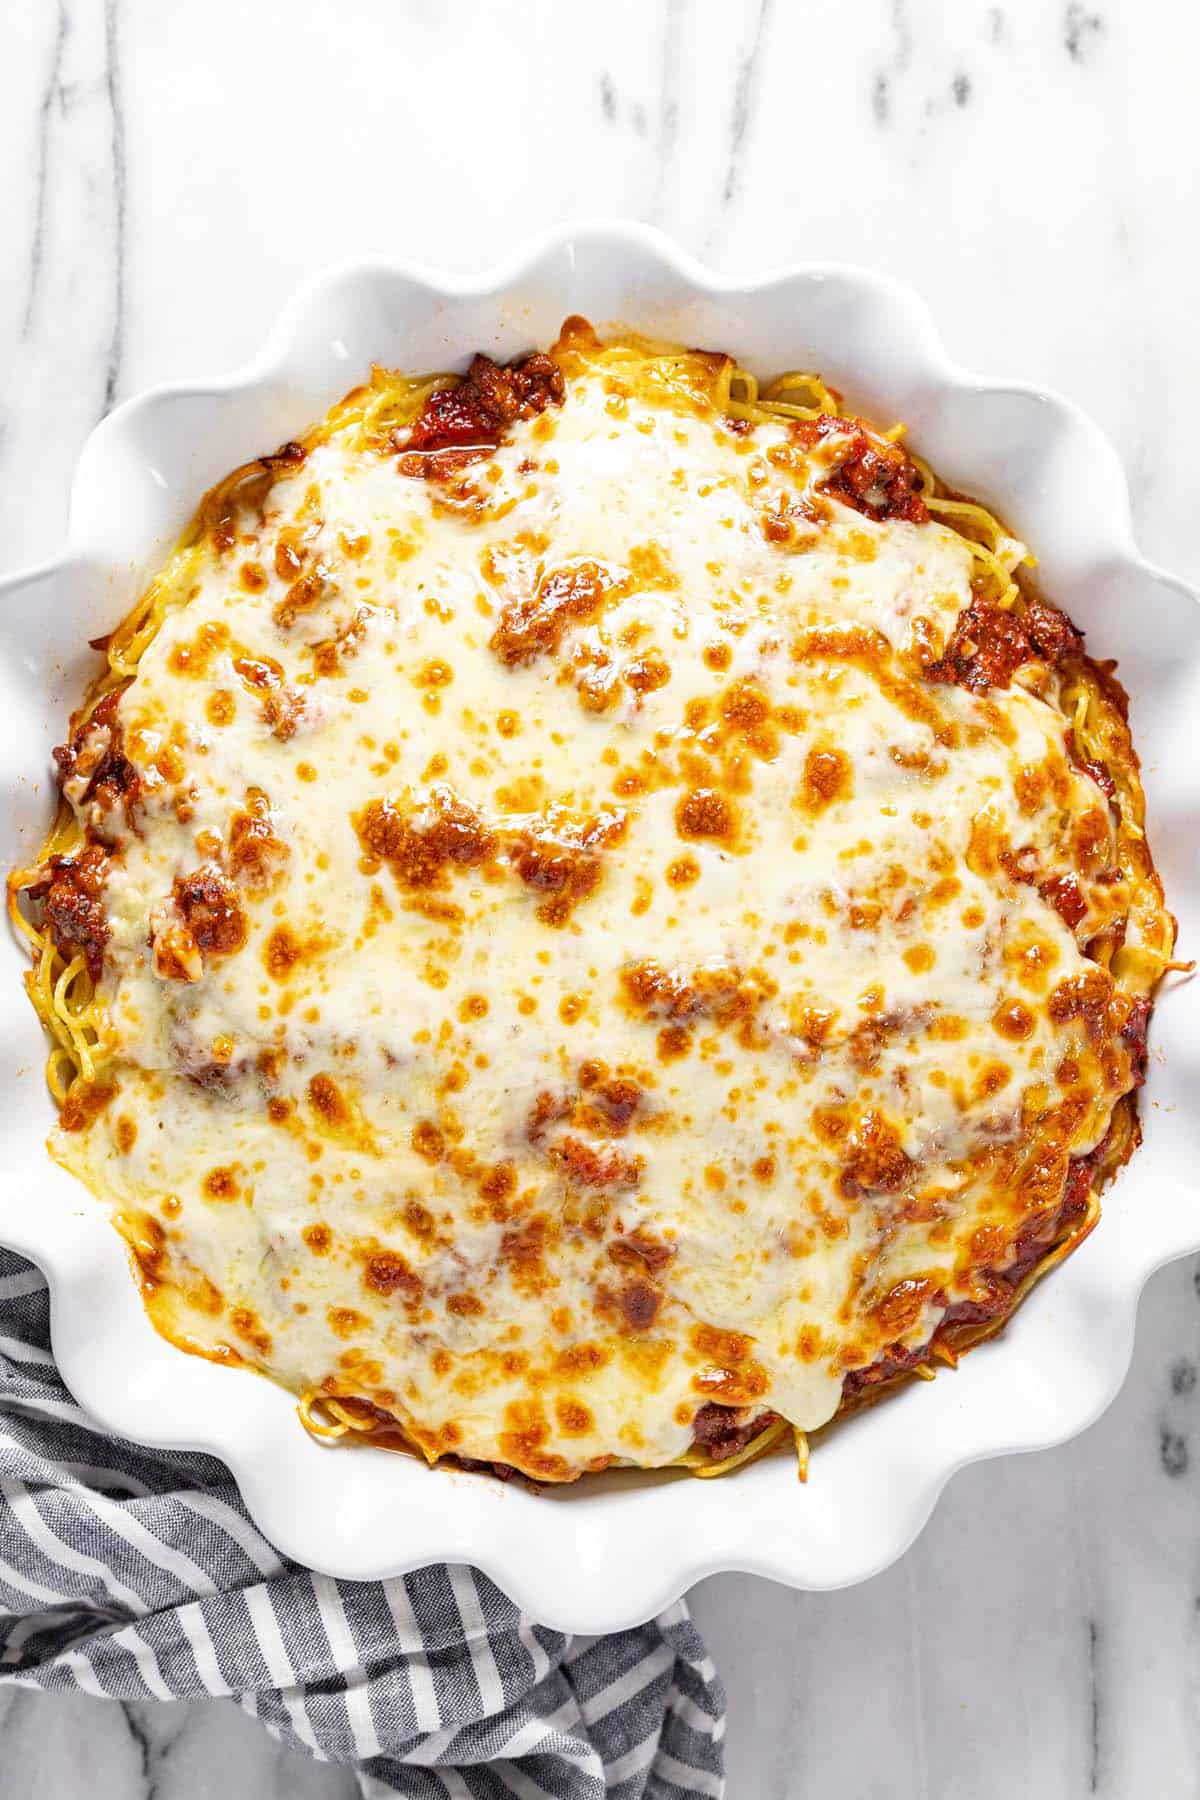 Large pie pan filled with homemade spaghetti.